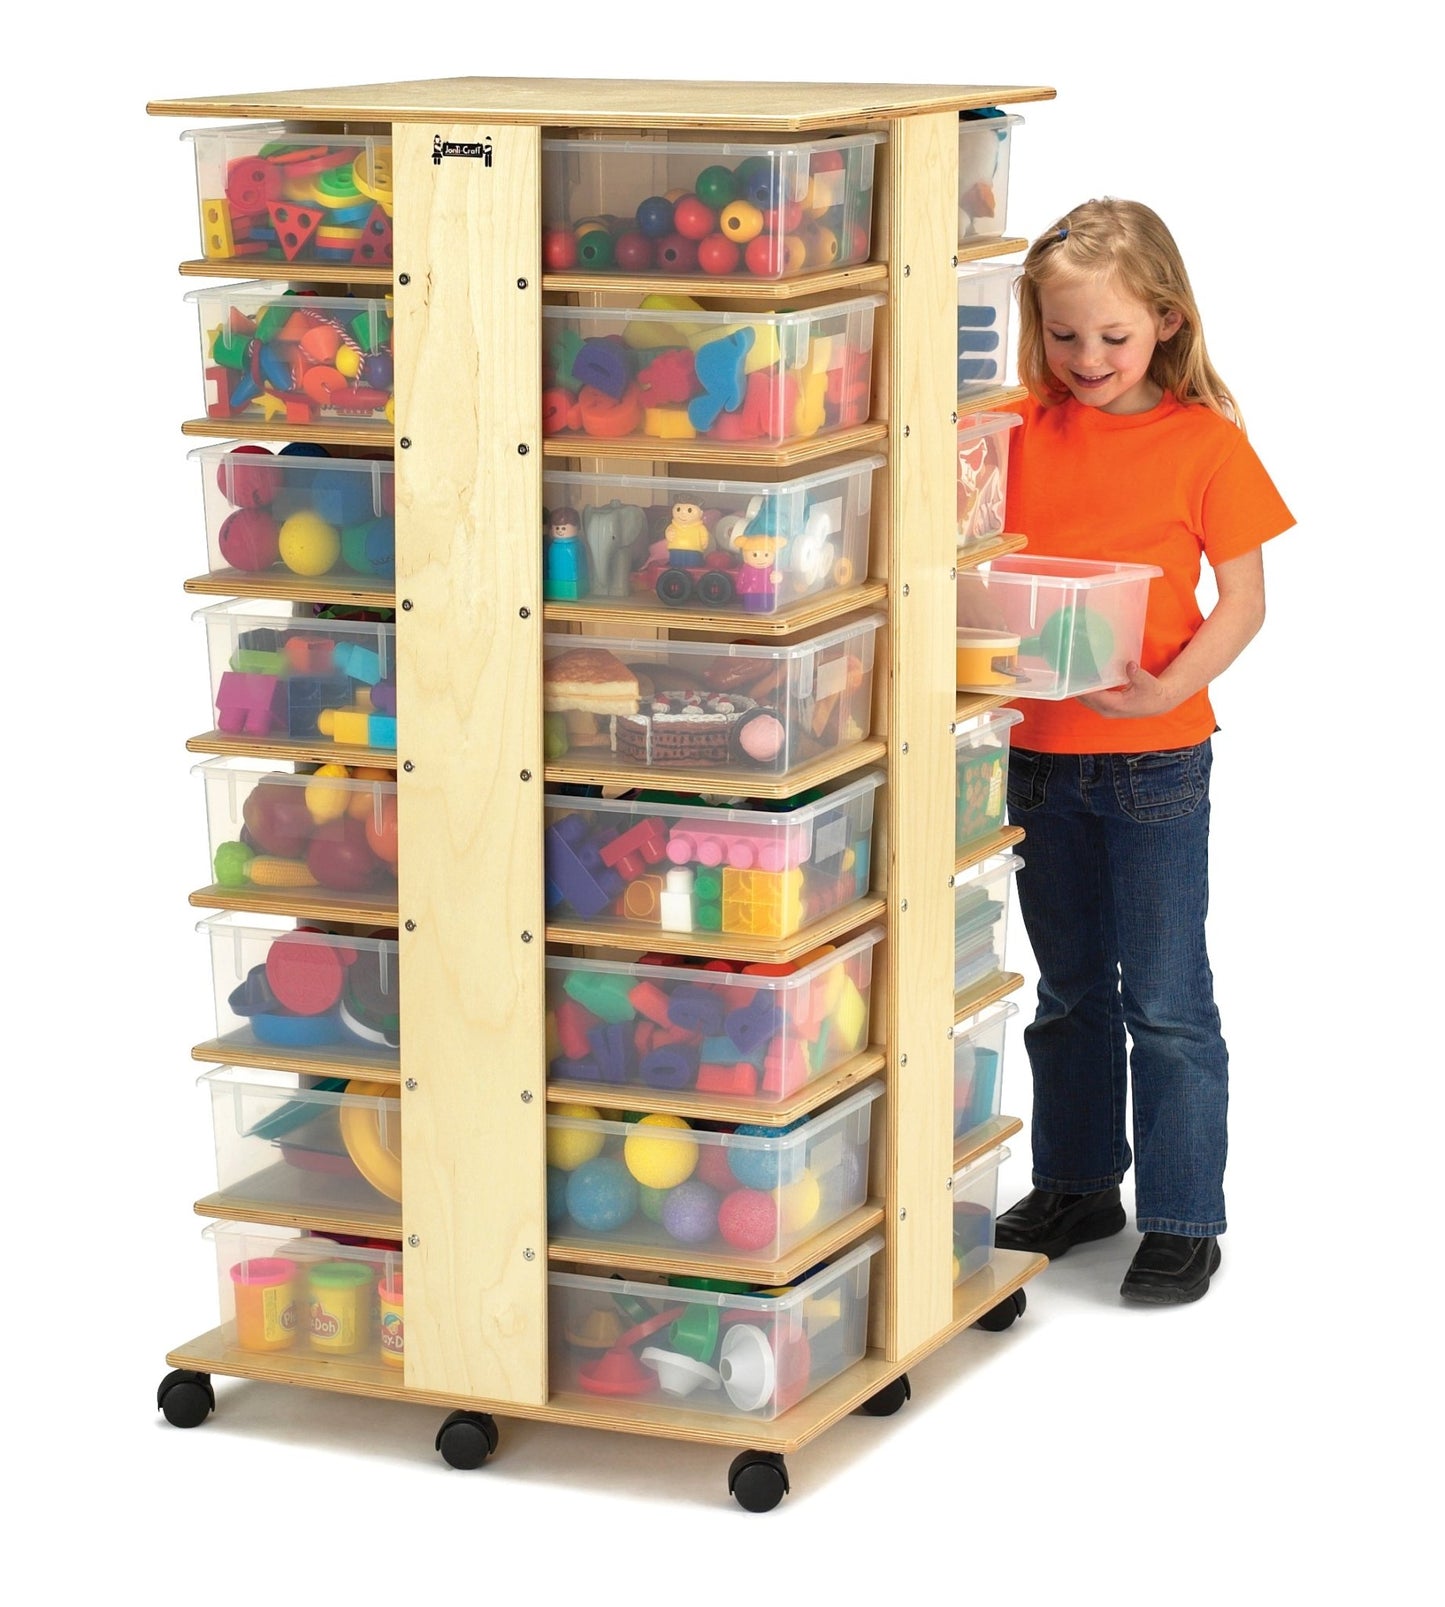 Jonti-Craft Mobile Cubby Storage Tower - 32 Cubbies with Colorful Tubs (Jonti-Craft JON-0354JC) - SchoolOutlet